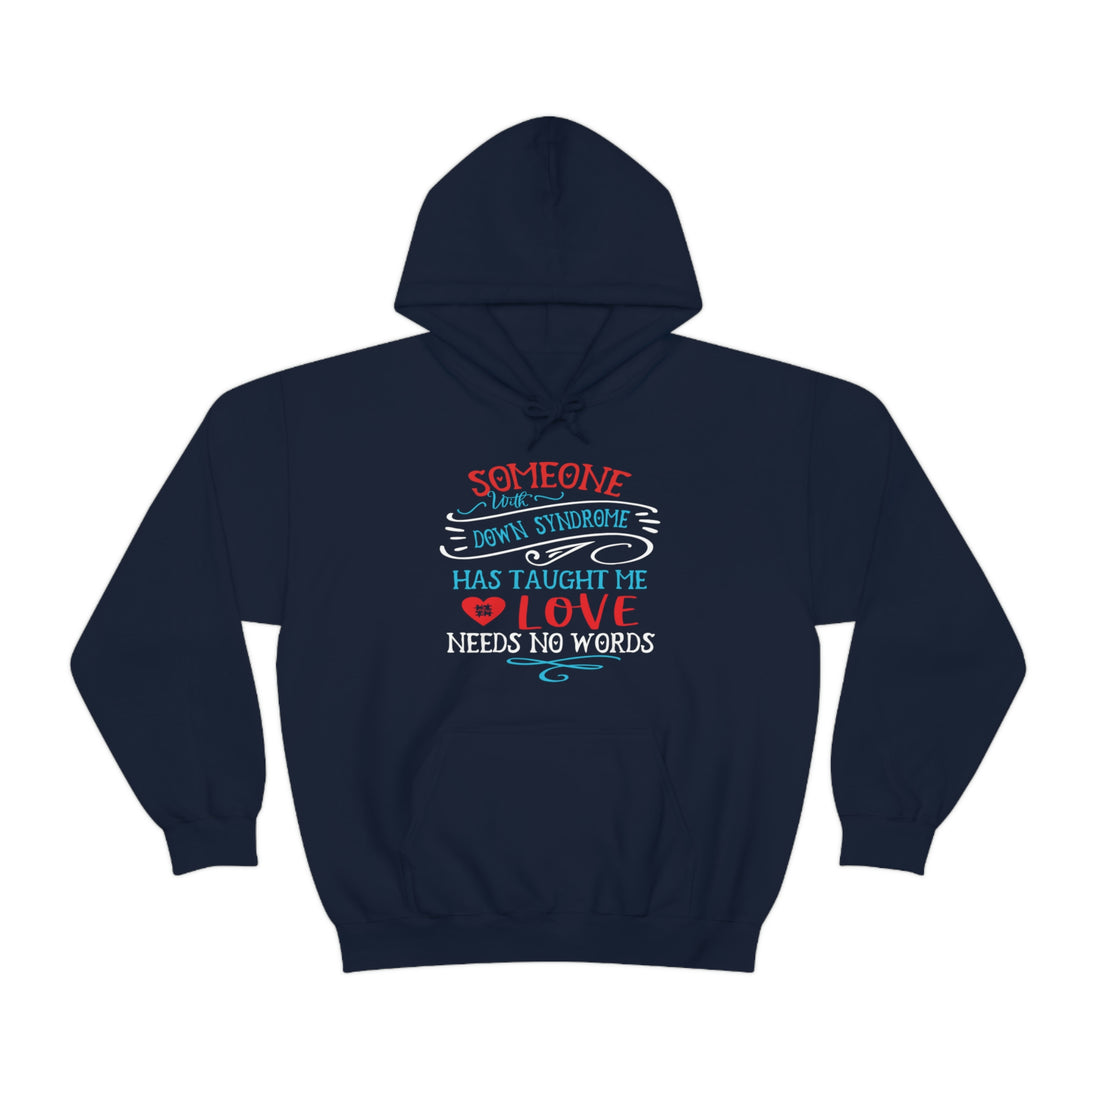 Someone with Down Syndrome Has Taught Me Love Needs No Words - Unisex Heavy Blend™ Hooded Sweatshirt